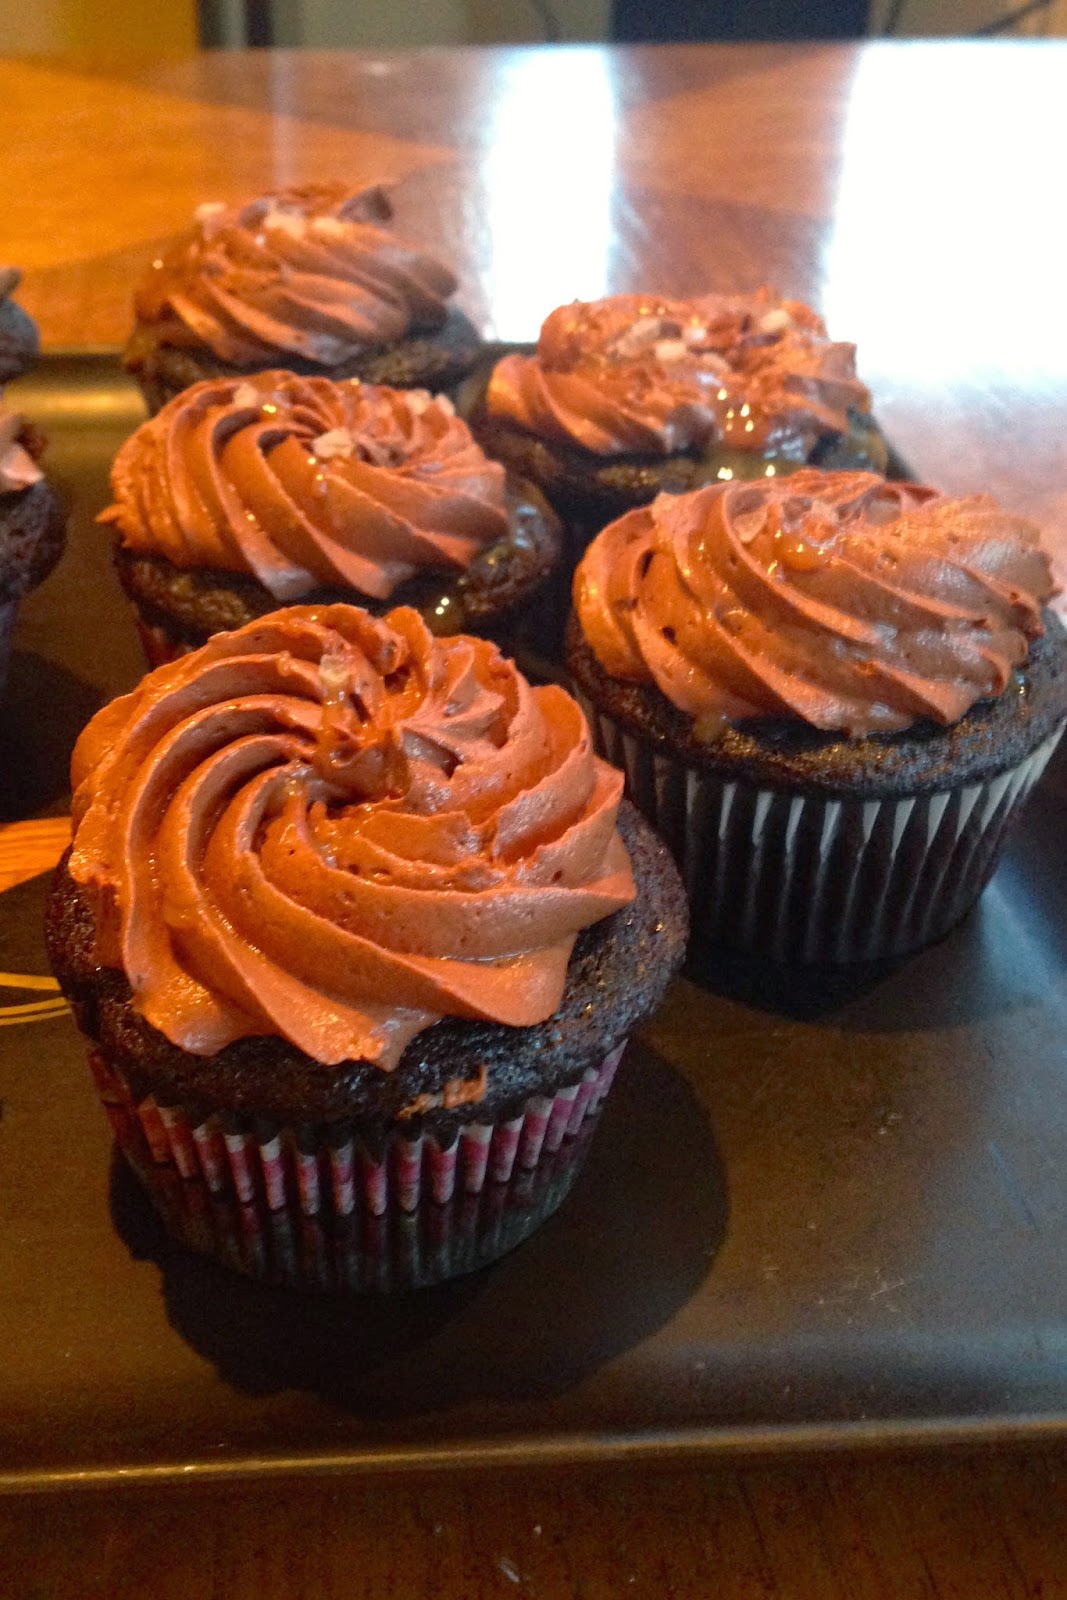 Cupcakes & Couture: Salted Caramel Filled Chocolate Cupcakes